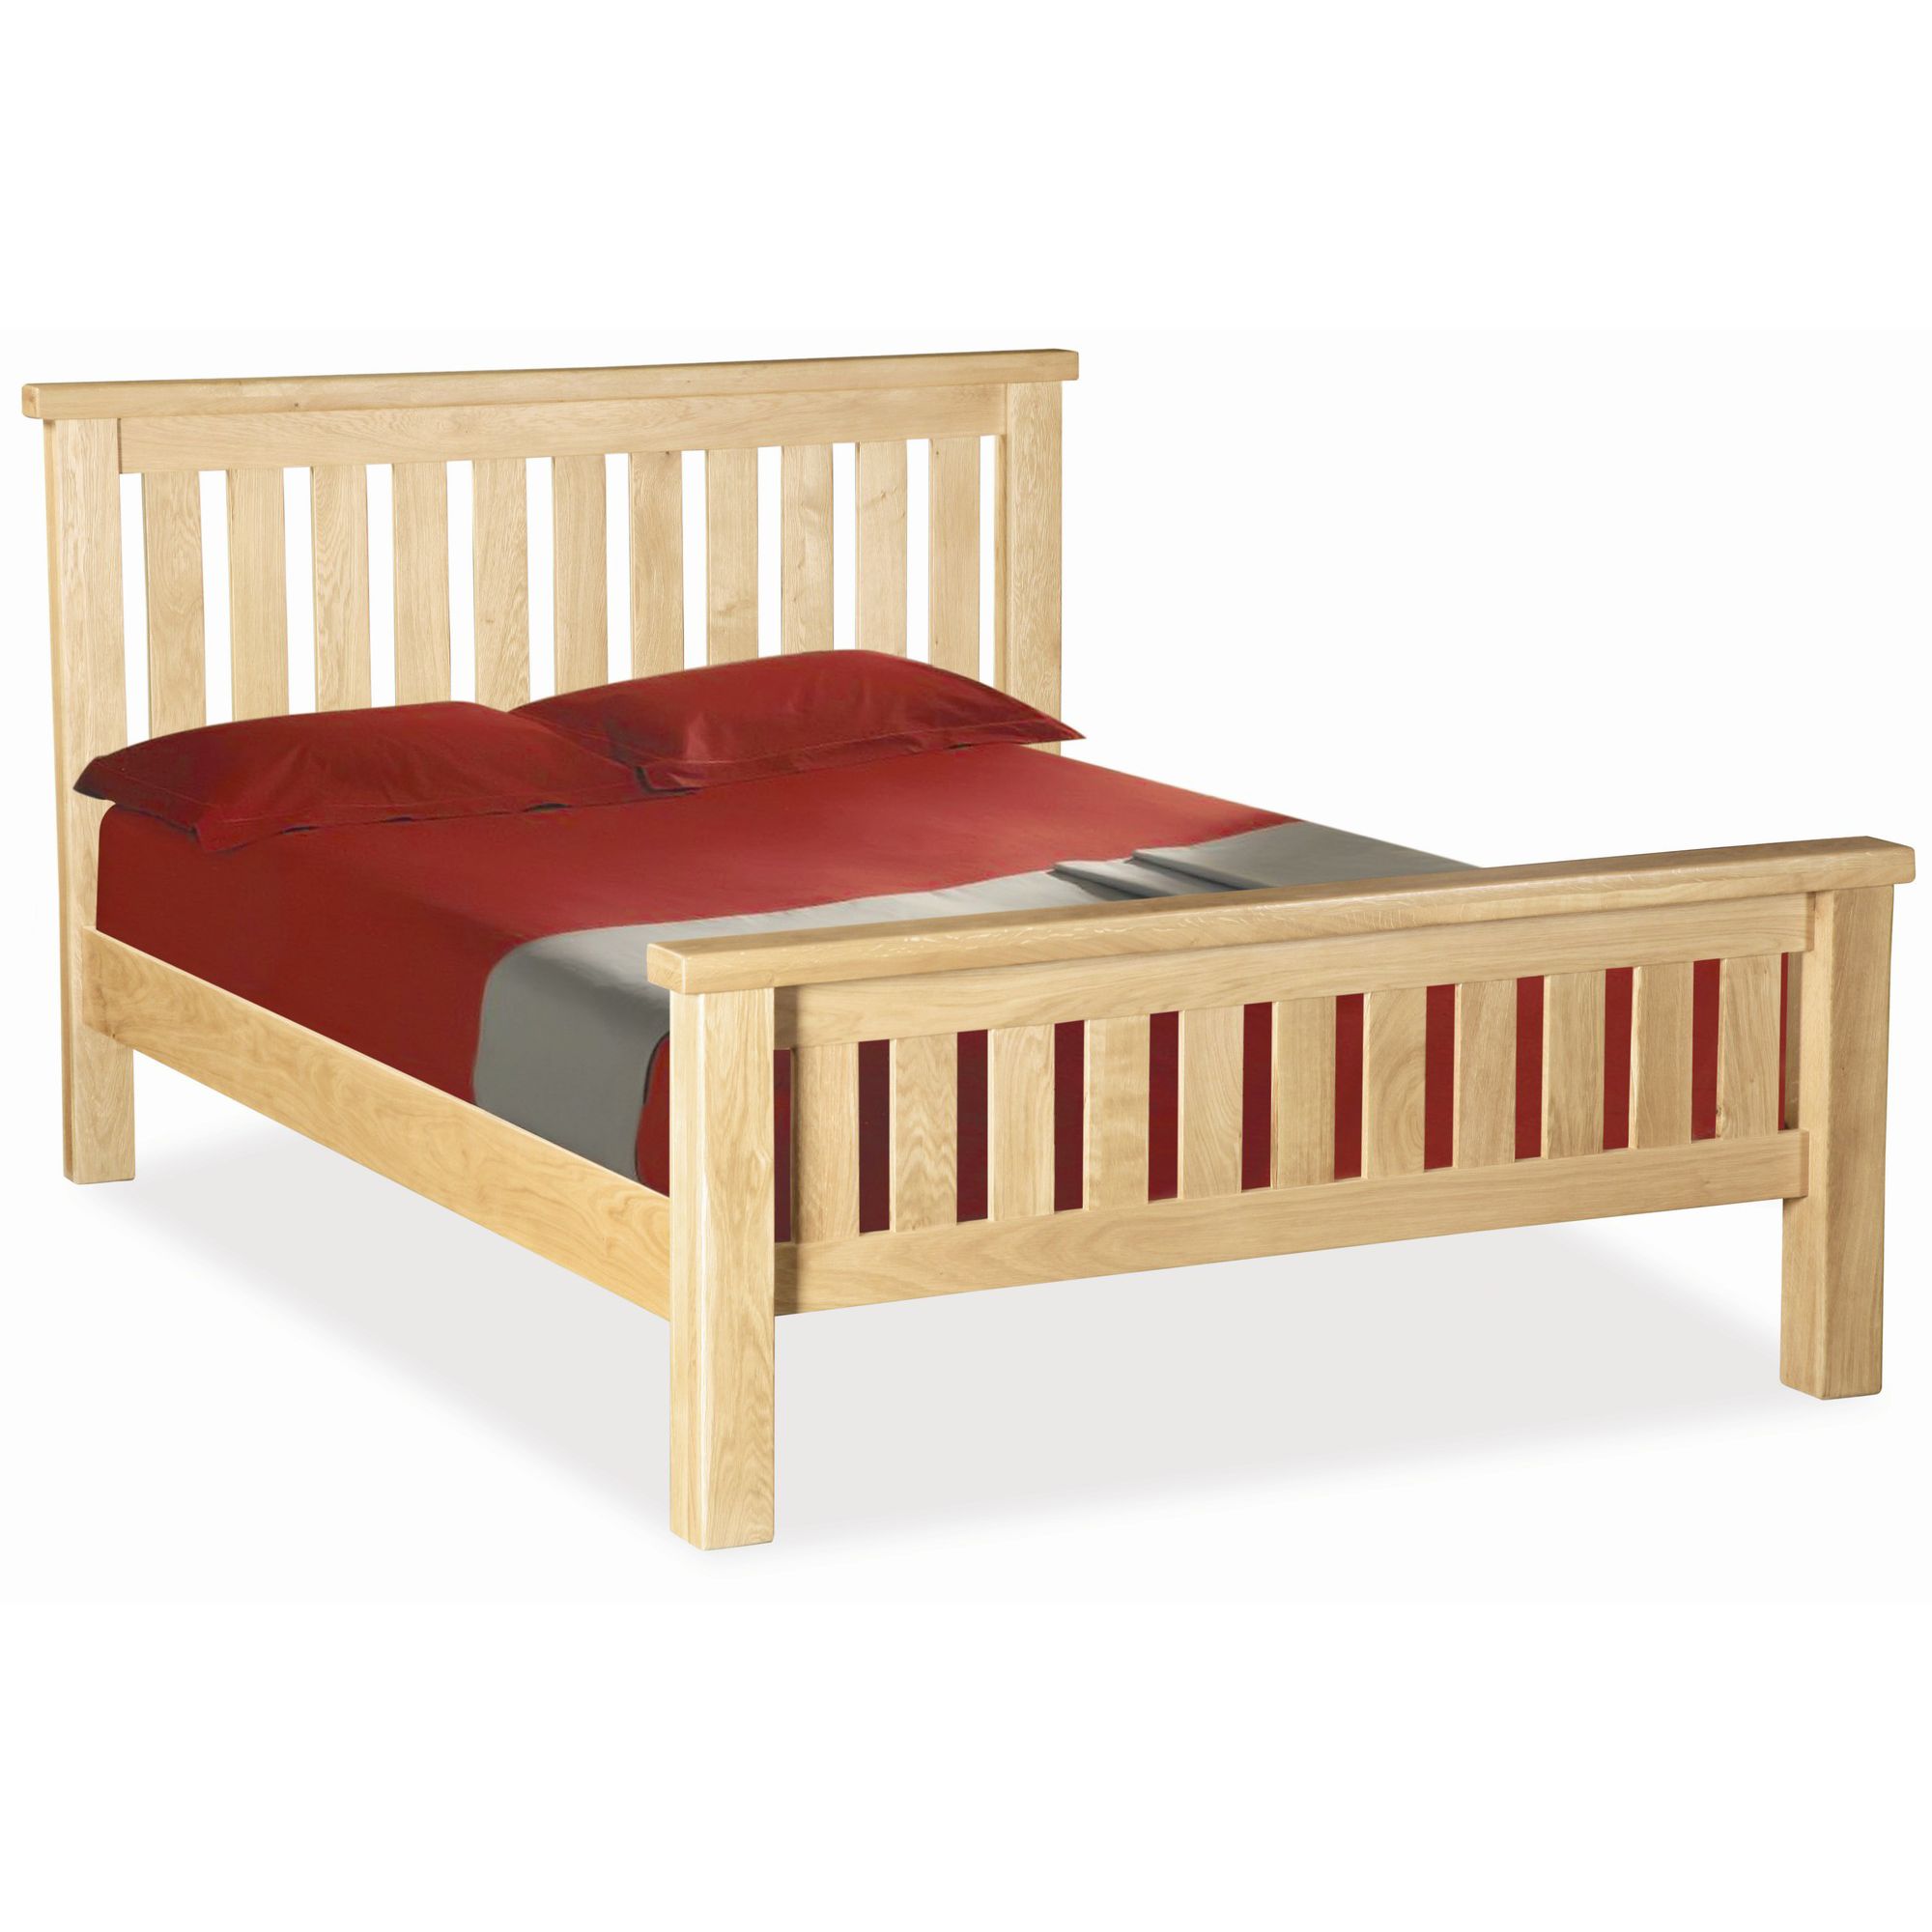 Alterton Furniture Chatsworth Slatted Bed - Double at Tesco Direct